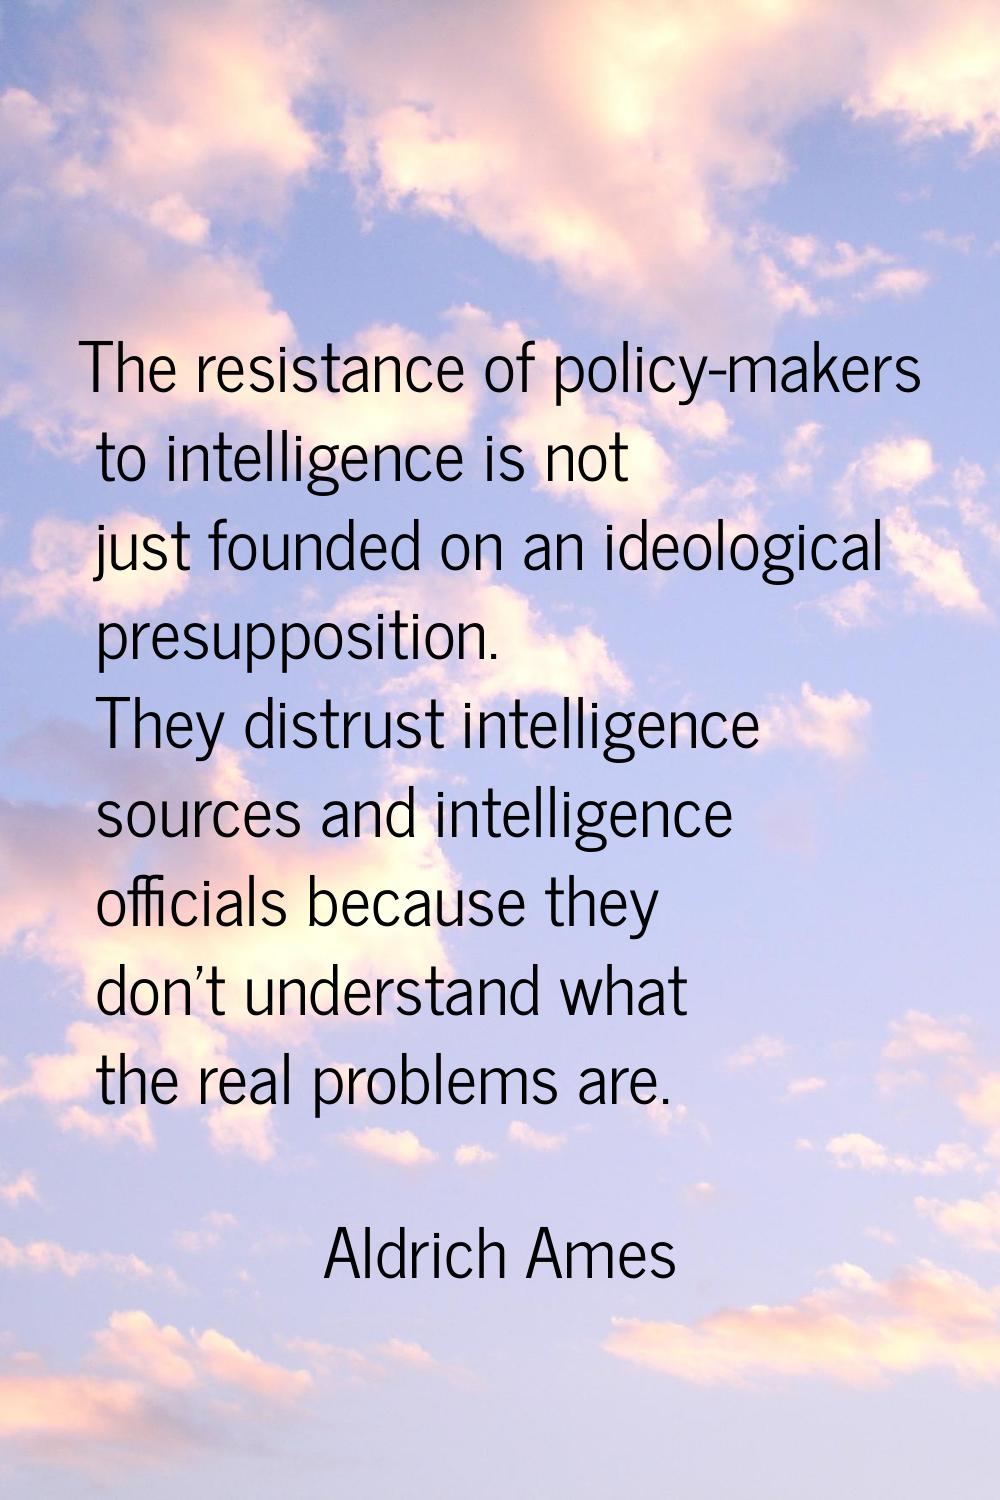 The resistance of policy-makers to intelligence is not just founded on an ideological presuppositio